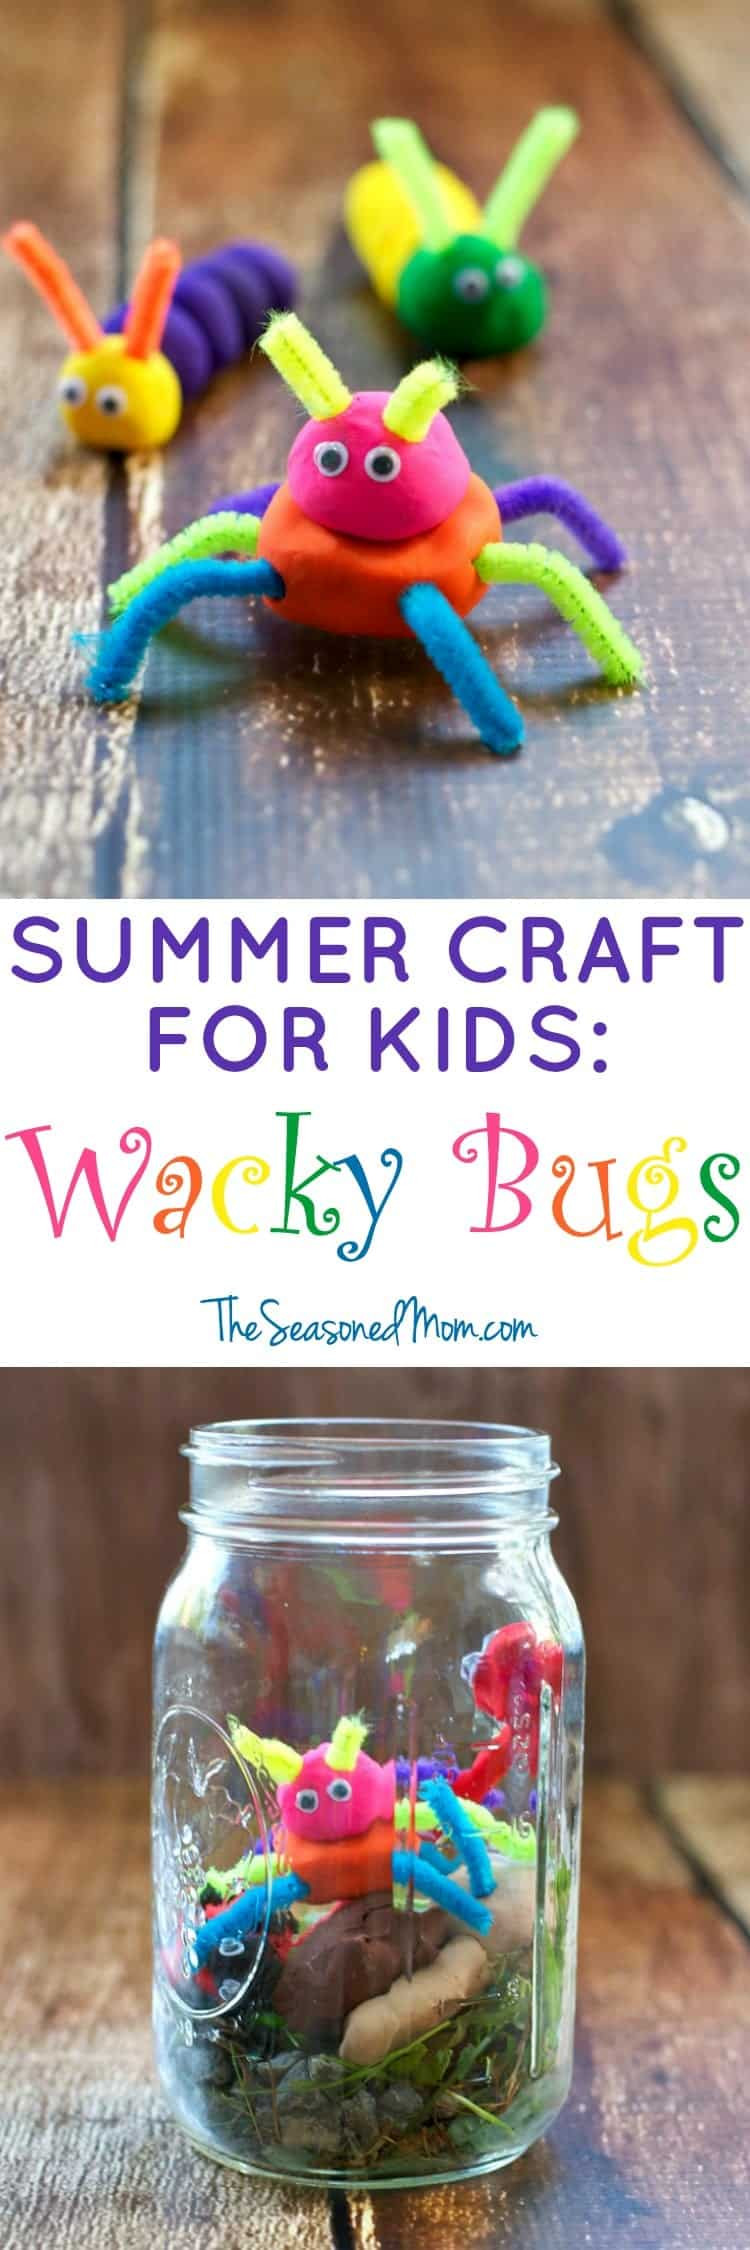 Summer Crafts Ideas For Kids
 Summer Craft for Kids Wacky Bugs The Seasoned Mom